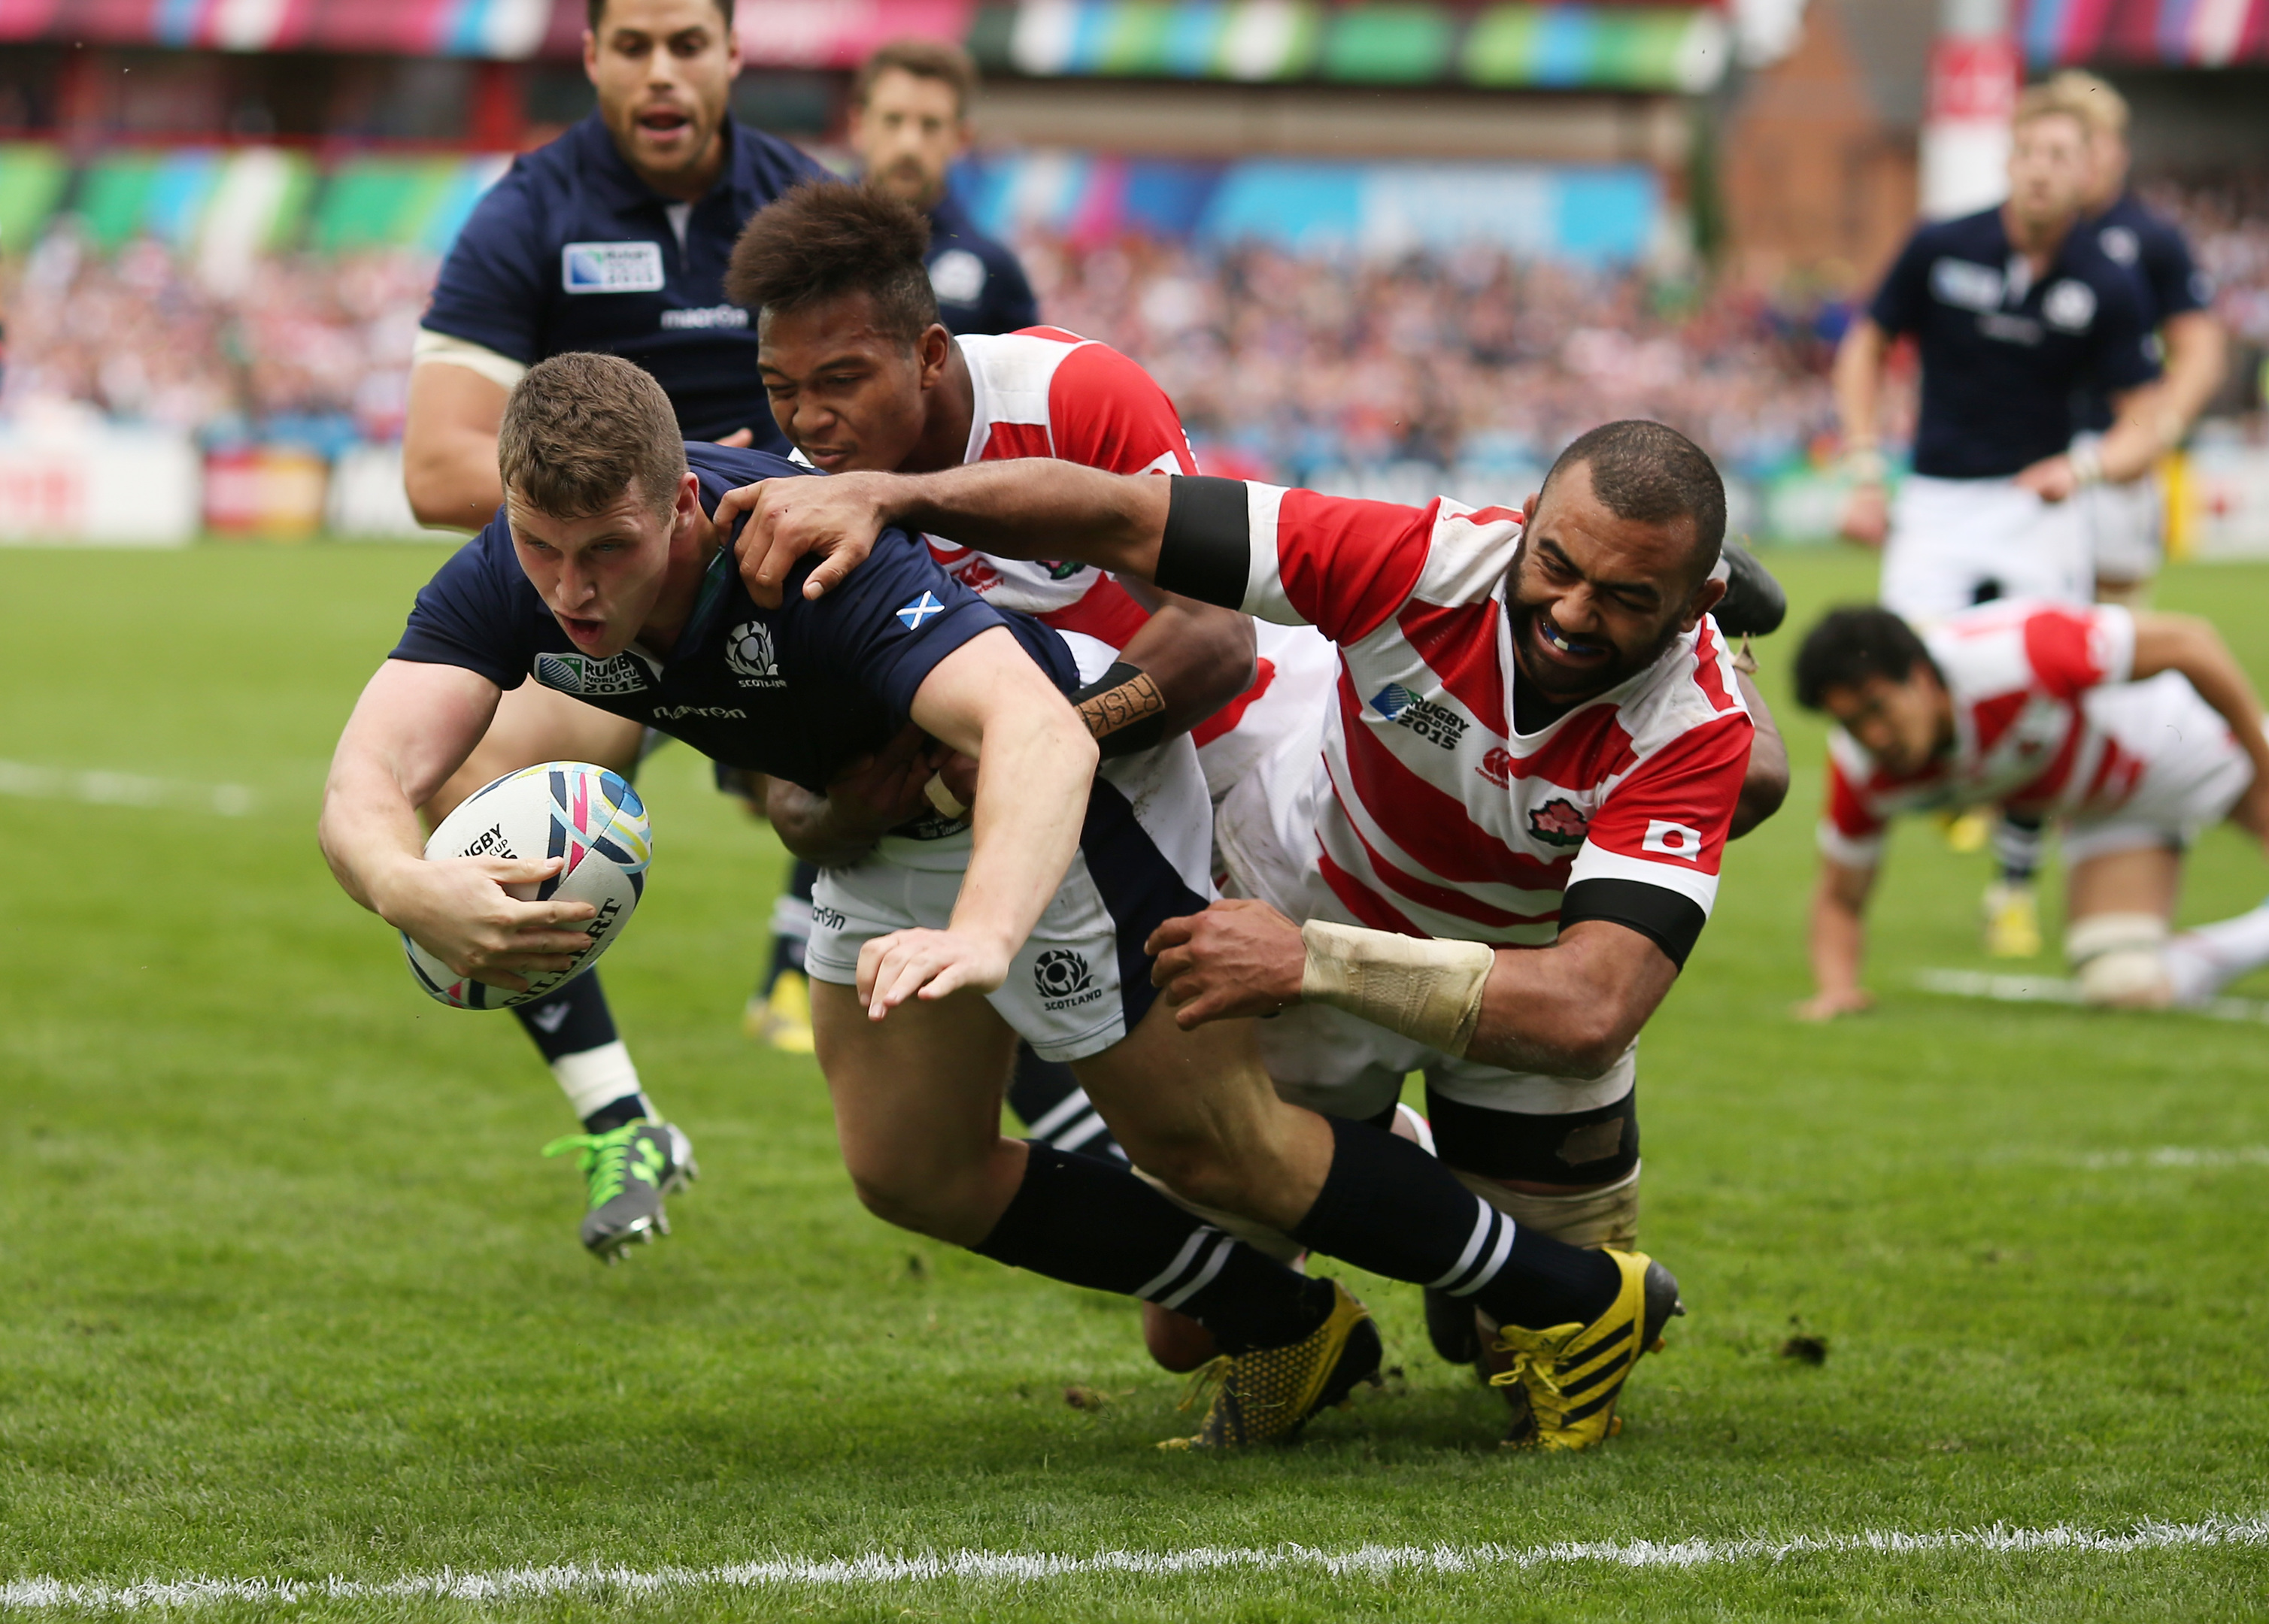 Scotland's Mark Bennett scores against Japan in the 2015 Rugby World Cup meeting at Gloucester.